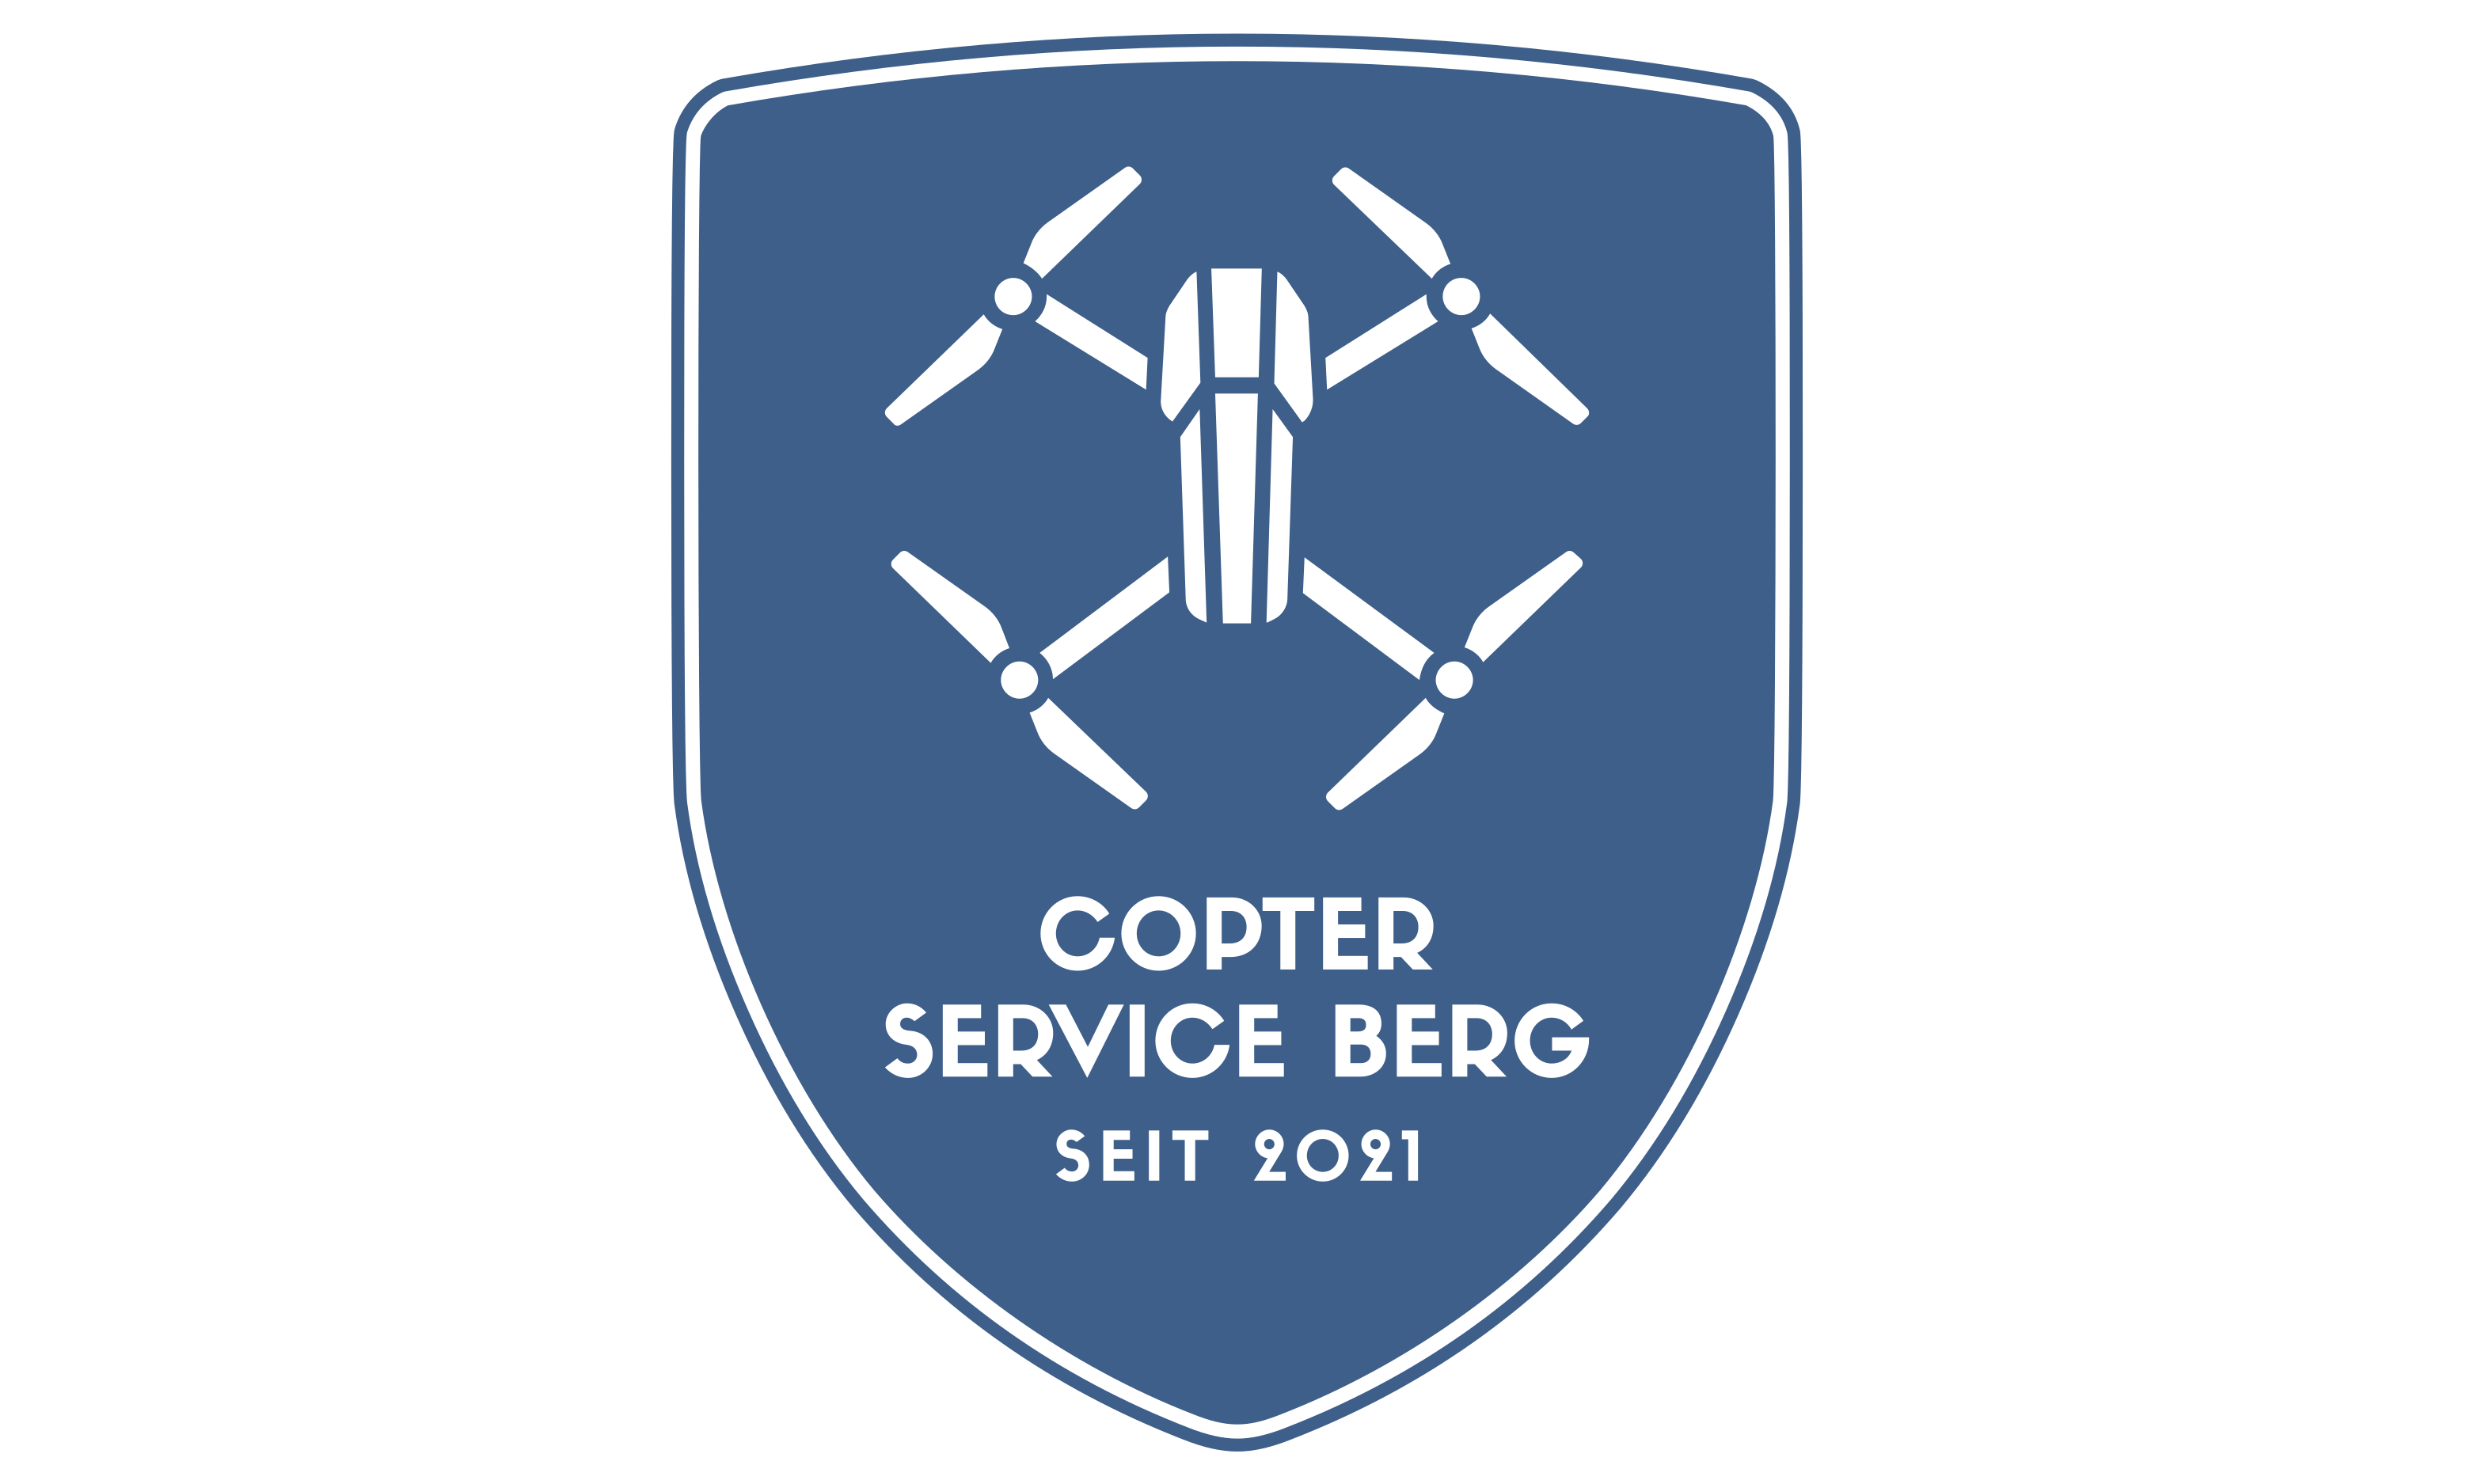 Copter Service Berg